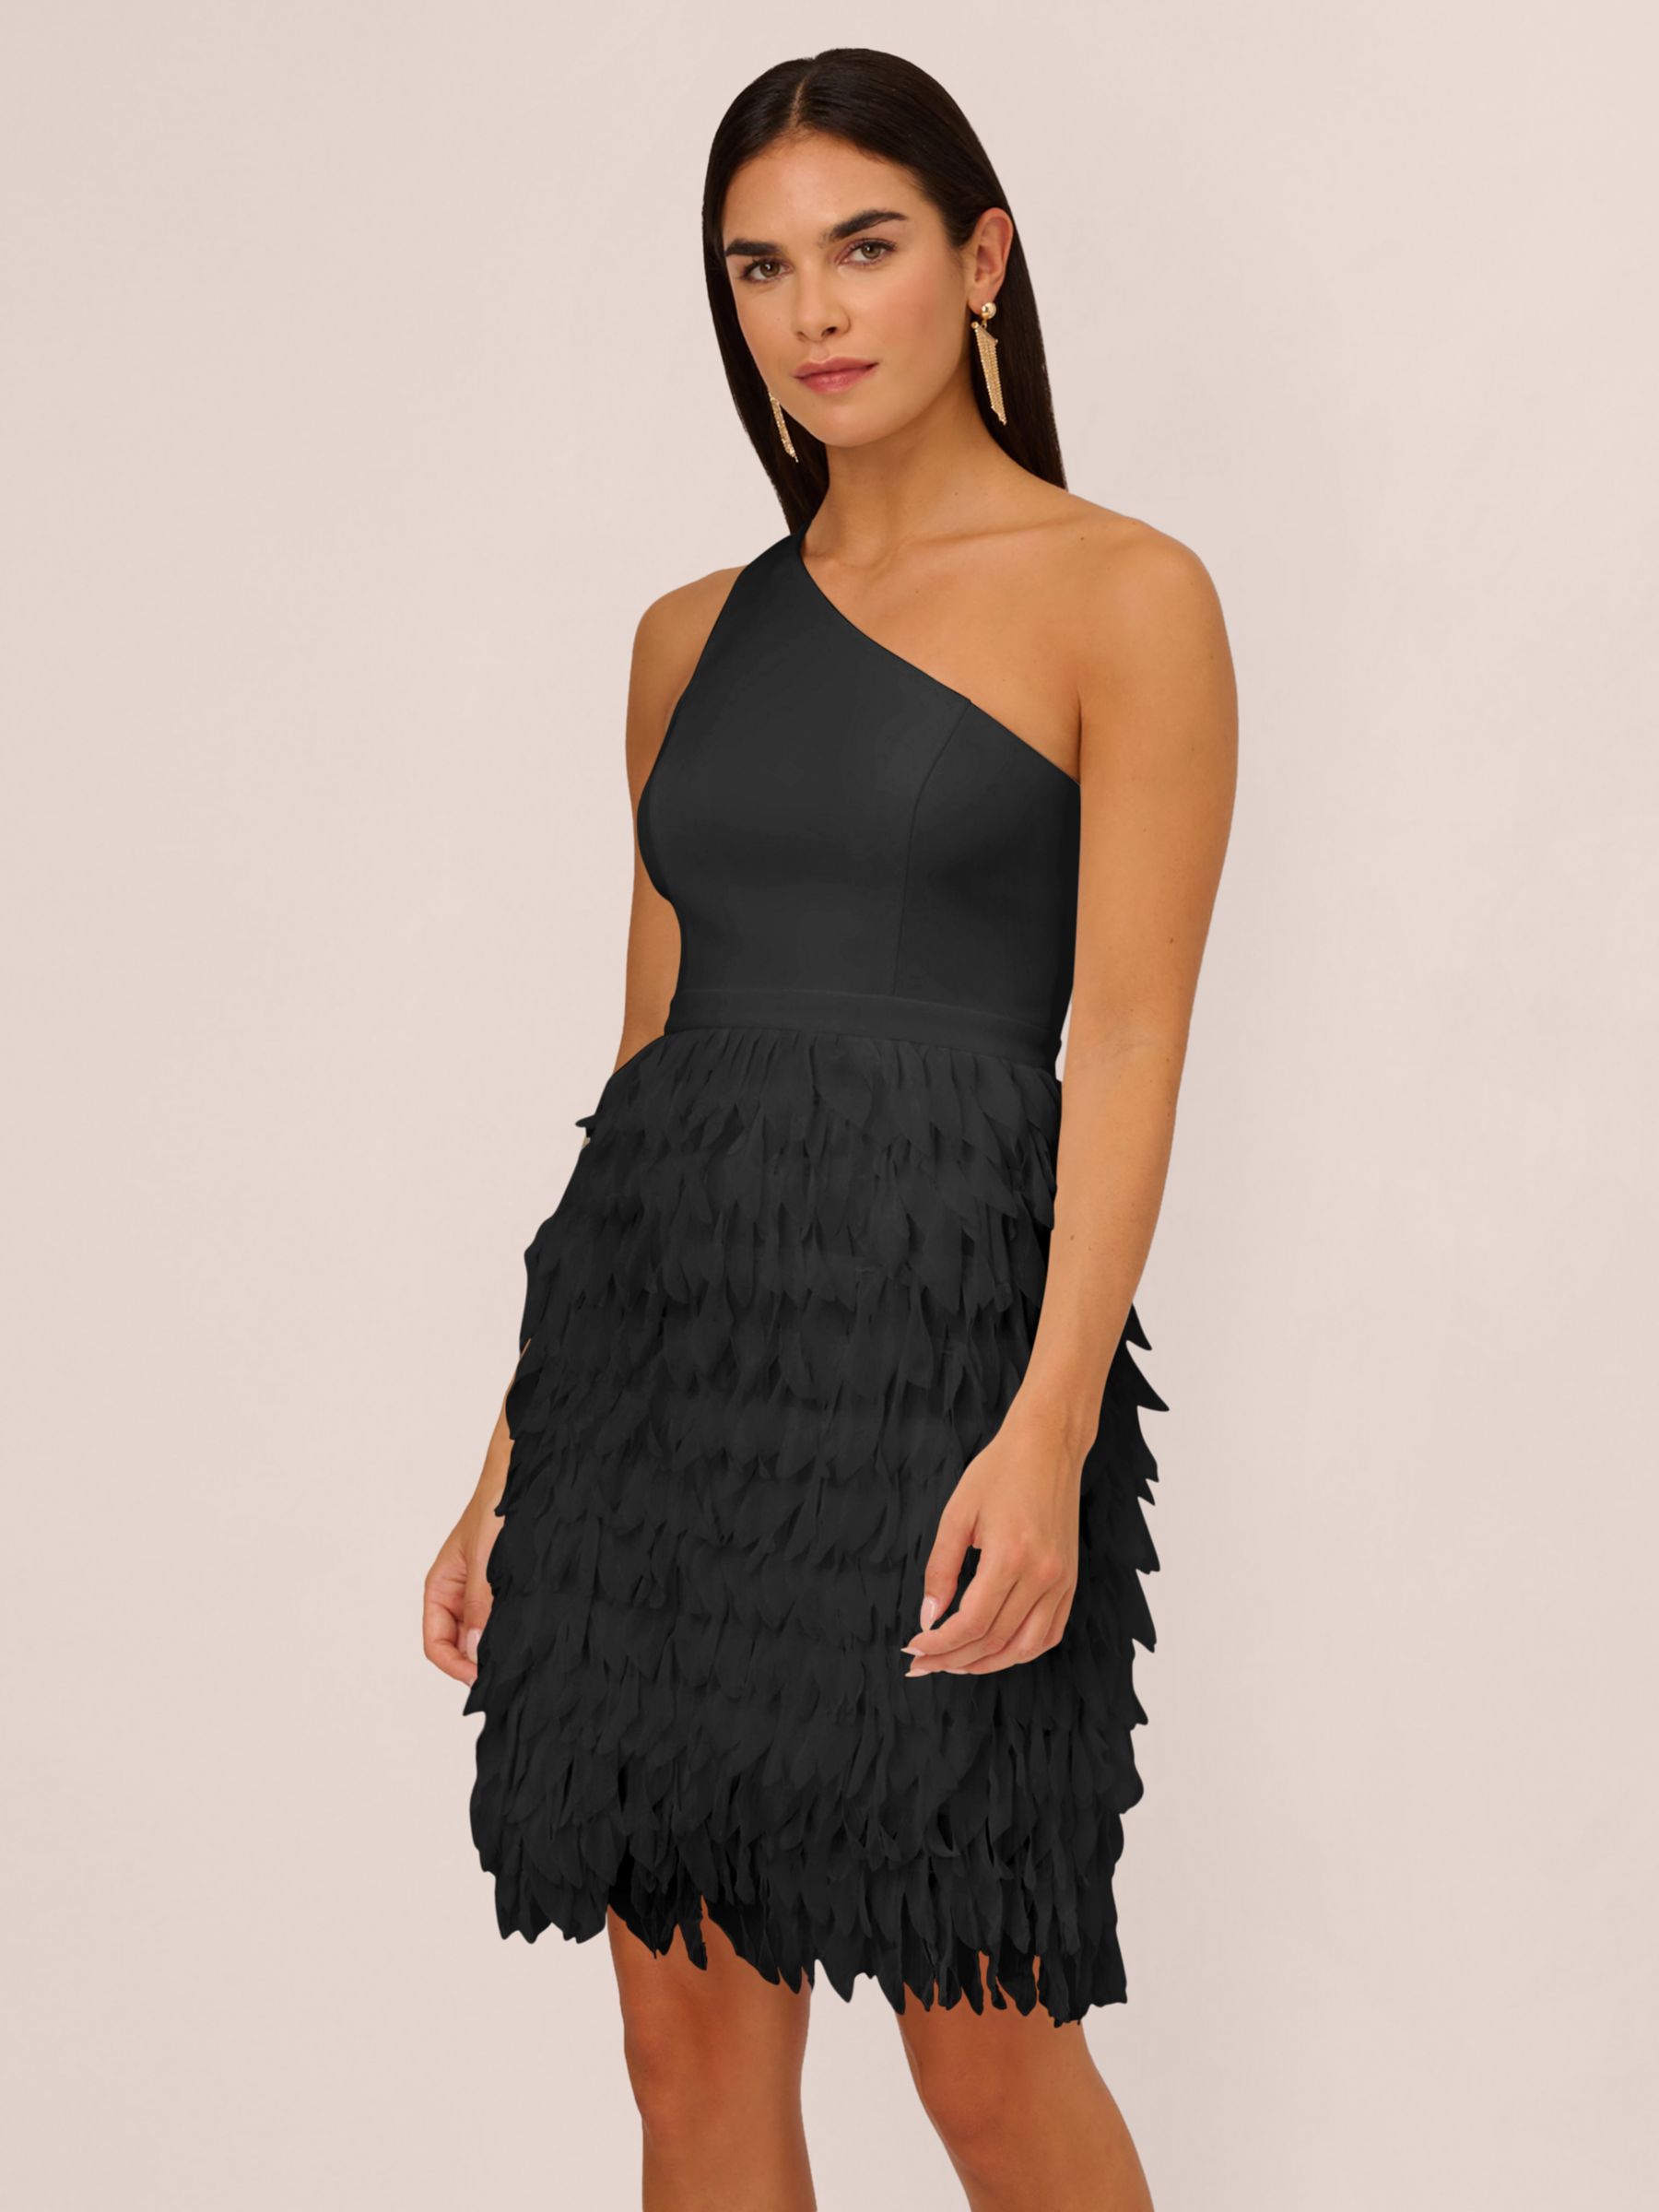 Aidan by Adrianna Papell Chiffon Feather Cocktail Dress, Black